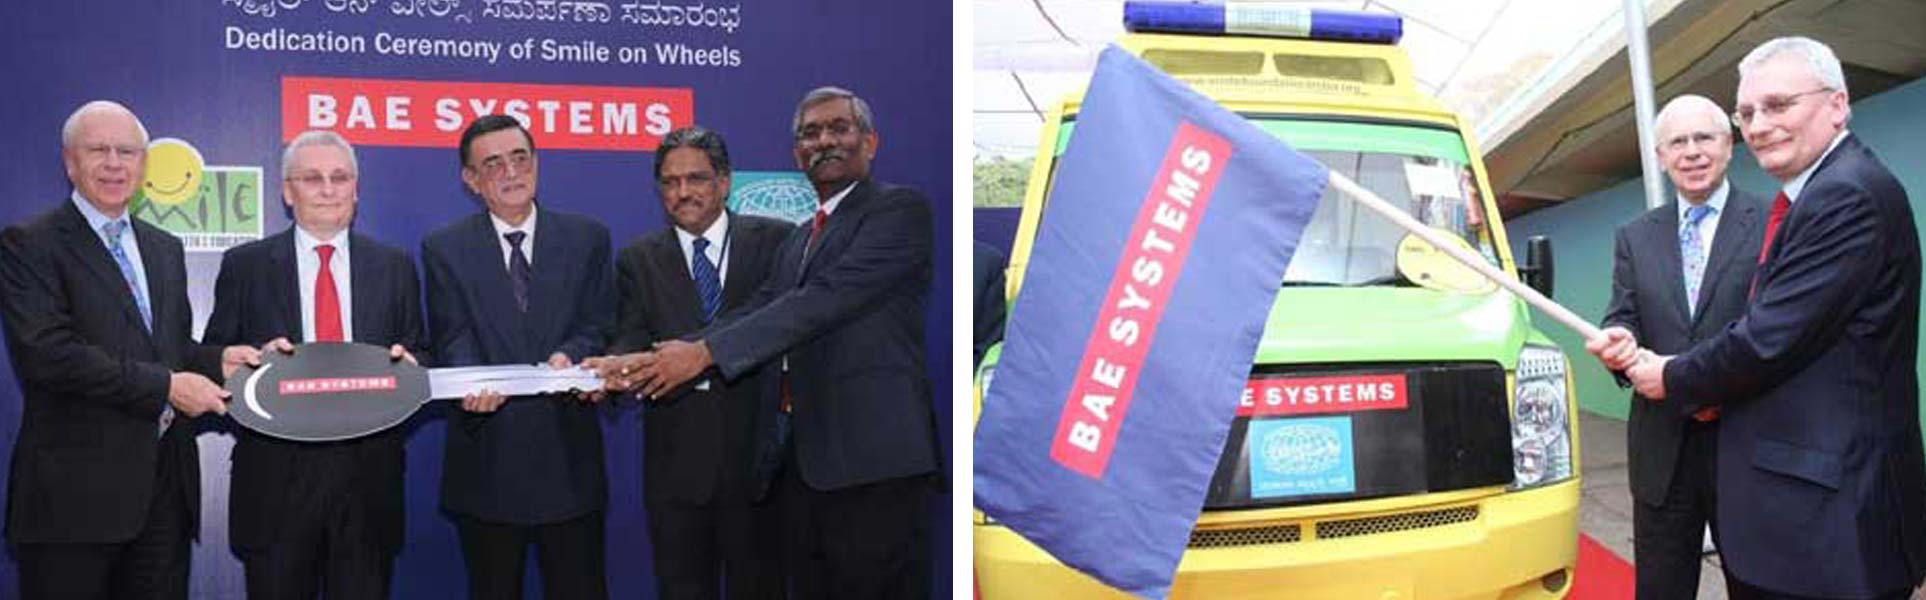 Smile on Wheels launched in Bangalore in partnership with BAE Systems